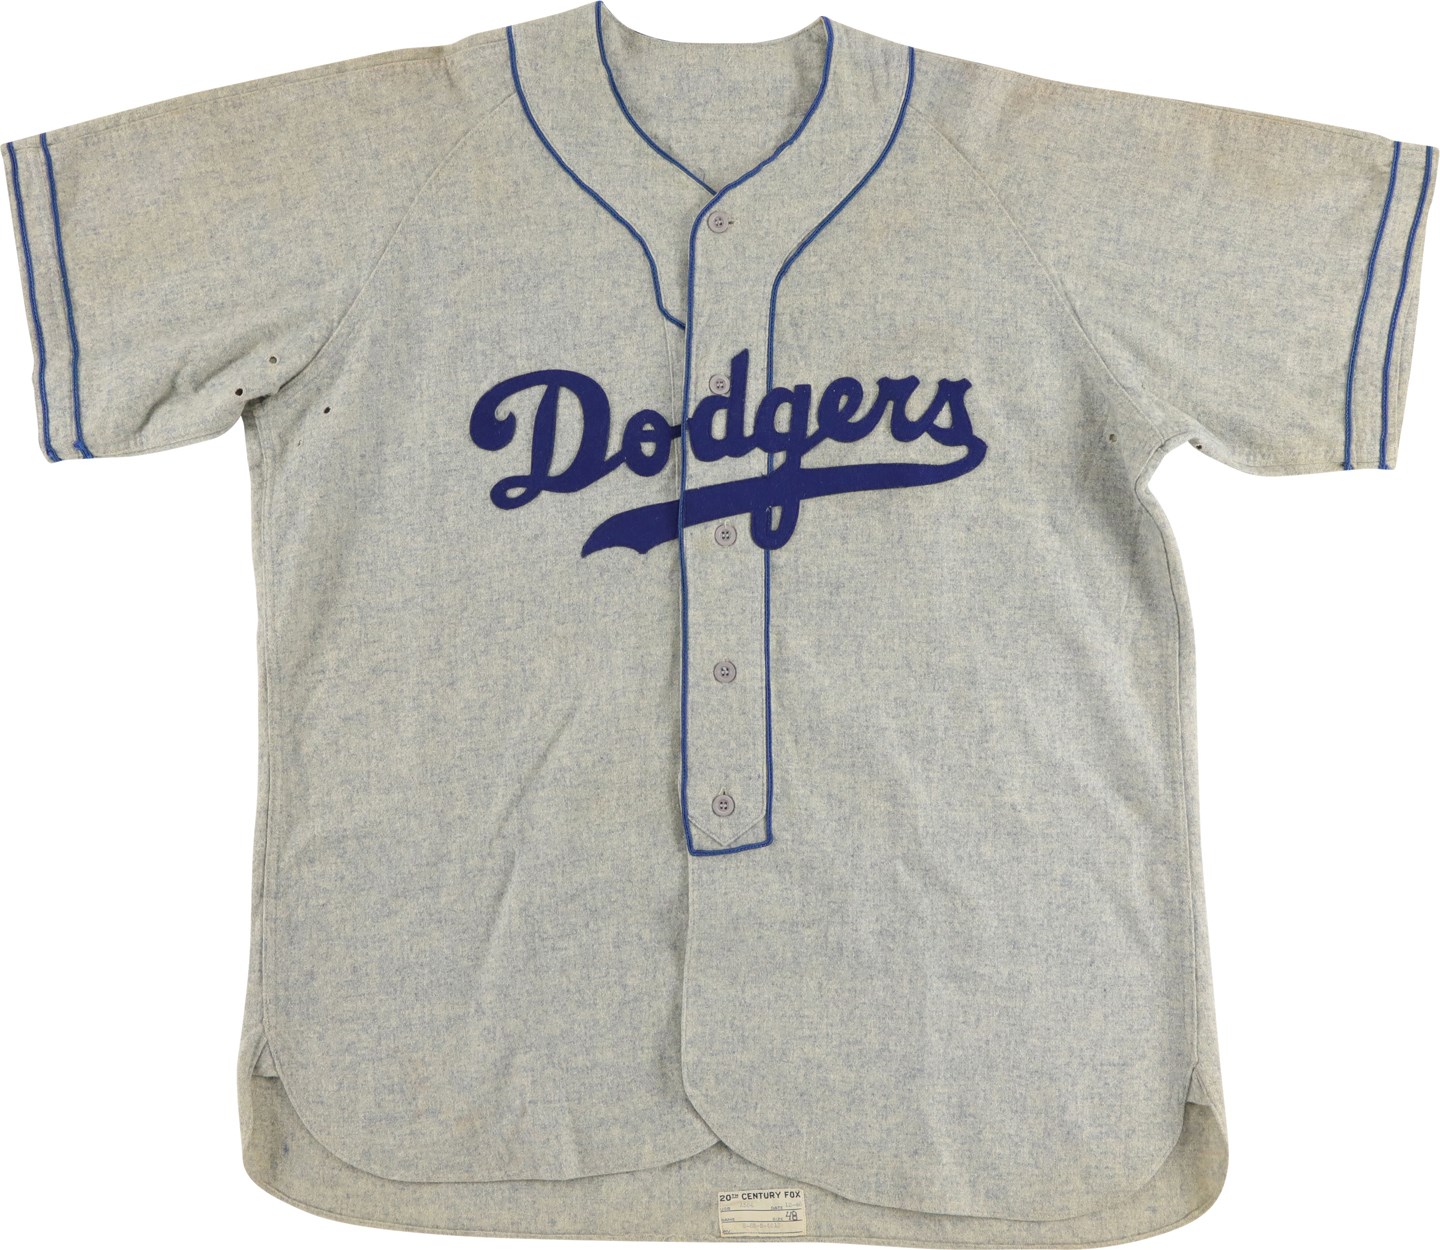 - Brooklyn Dodgers Jersey Worn in The Jackie Robinson Story